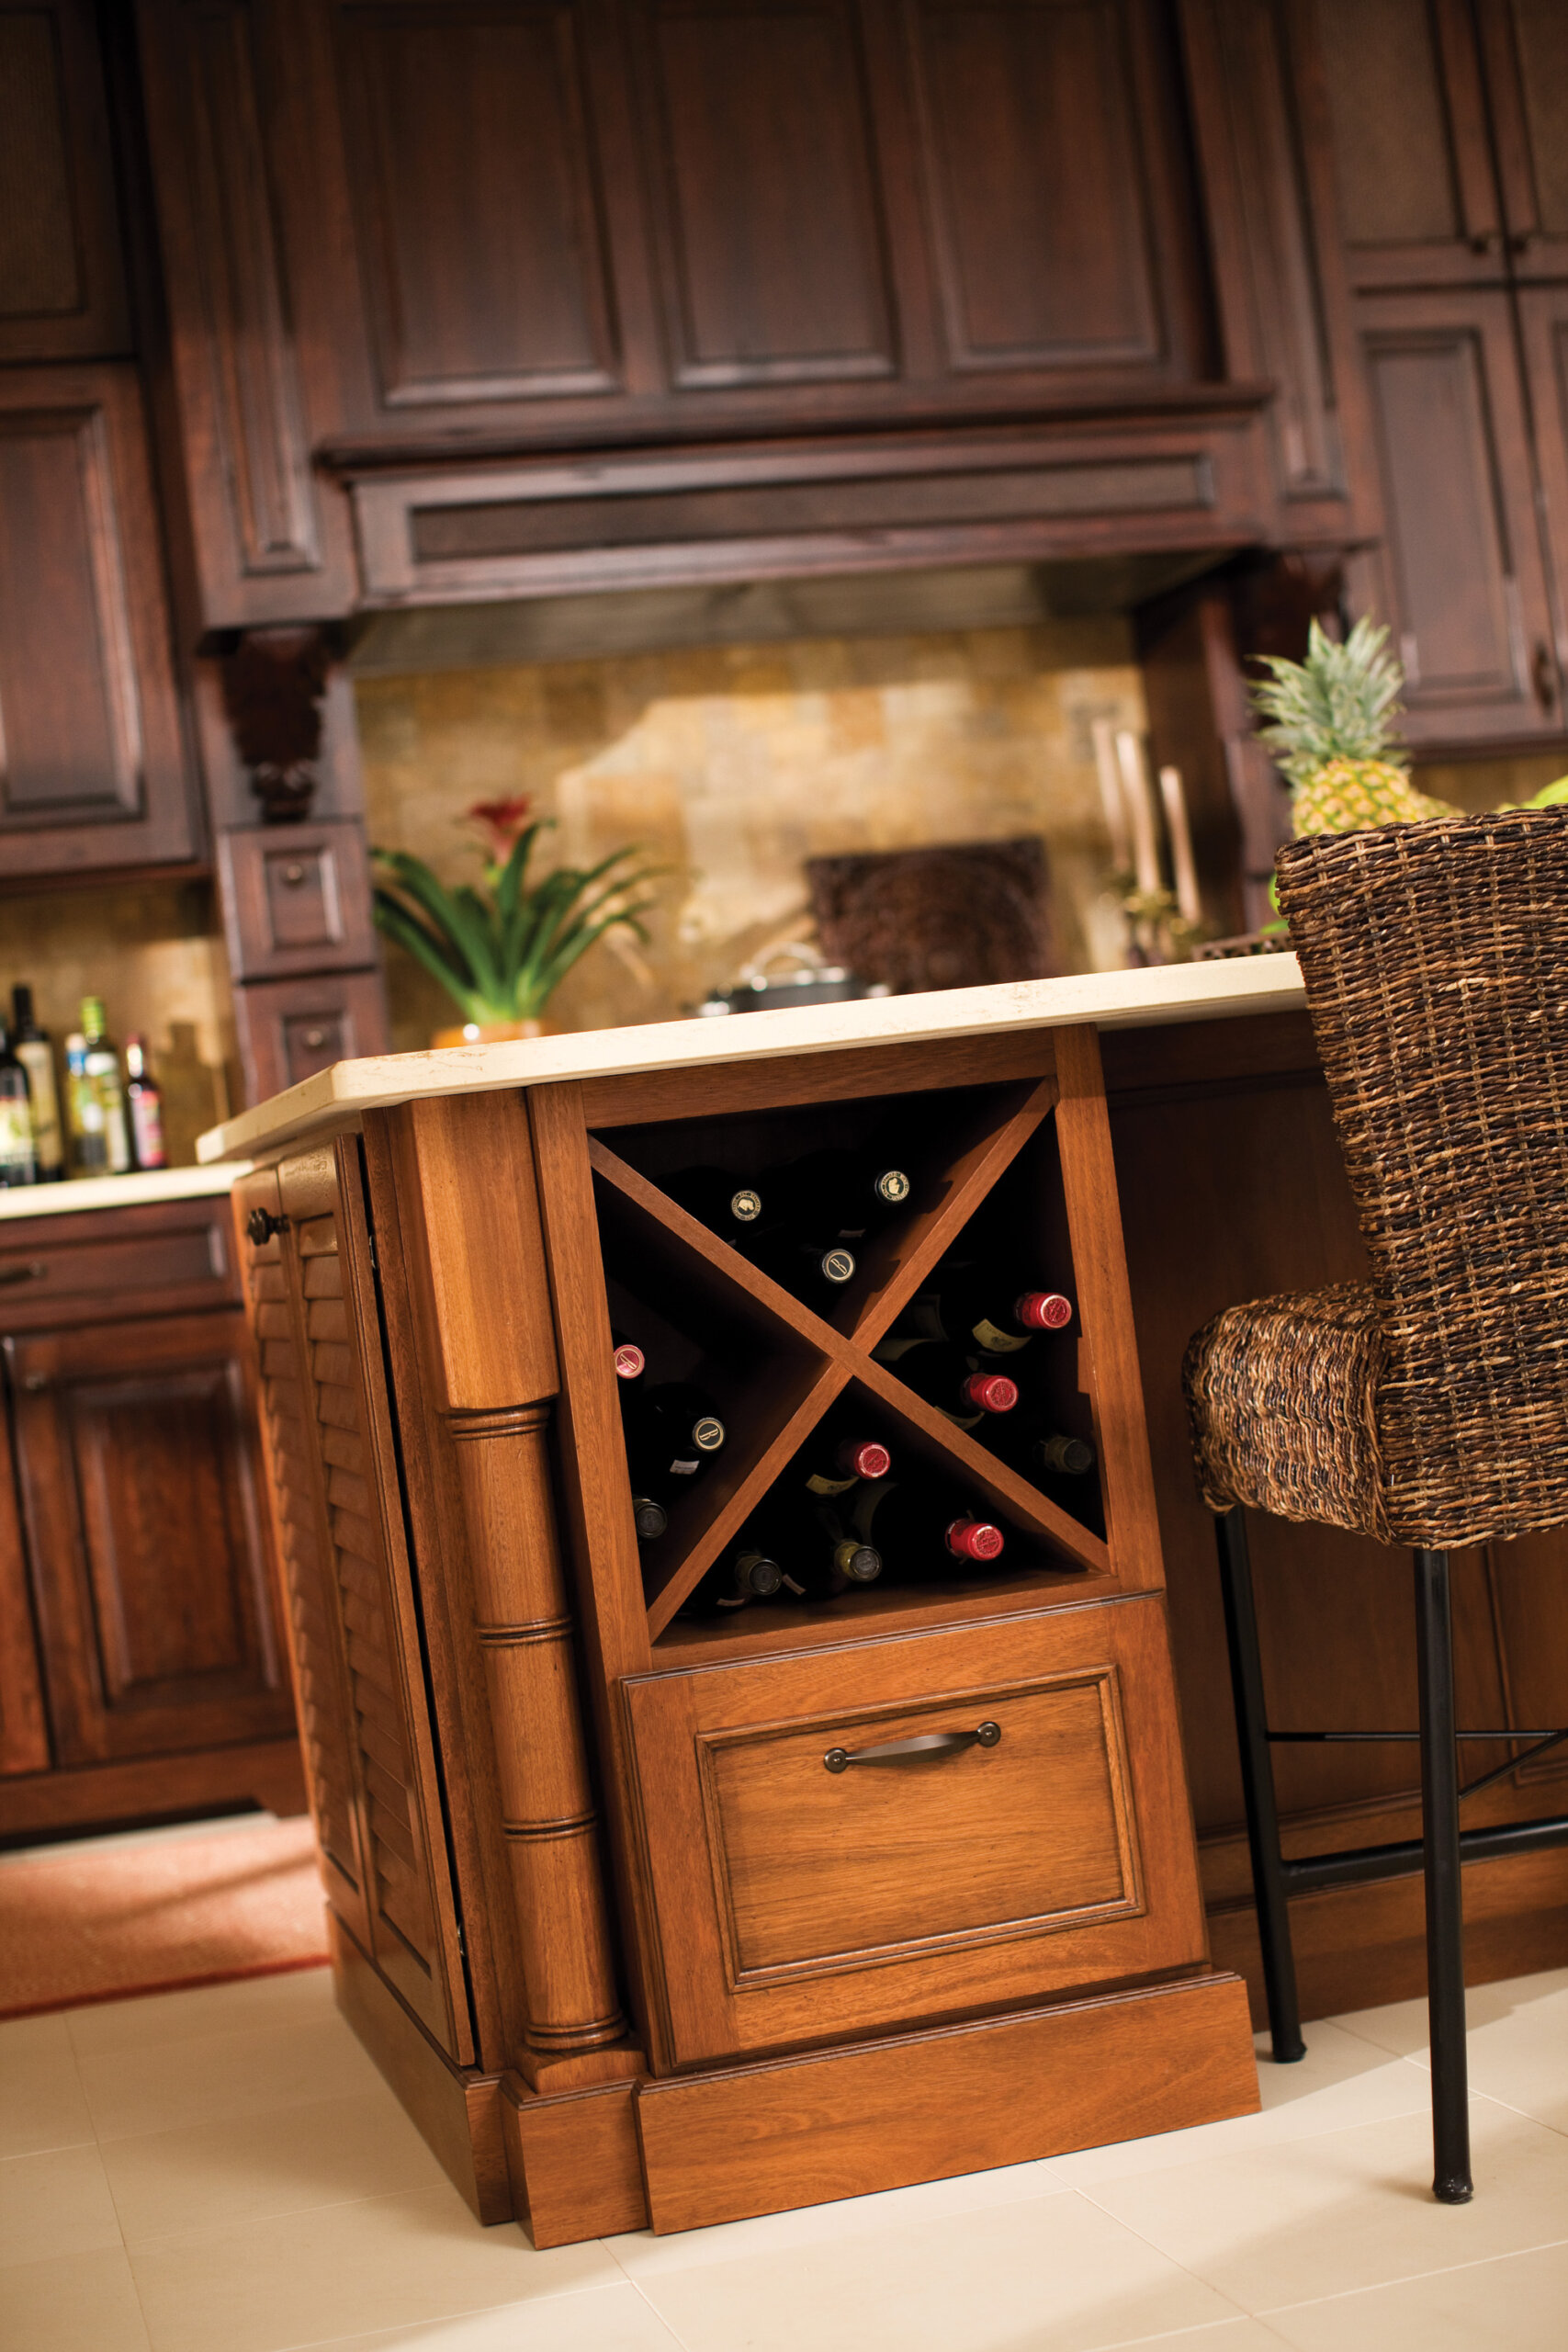 Dura Supreme base x wine cabinet with drawer.